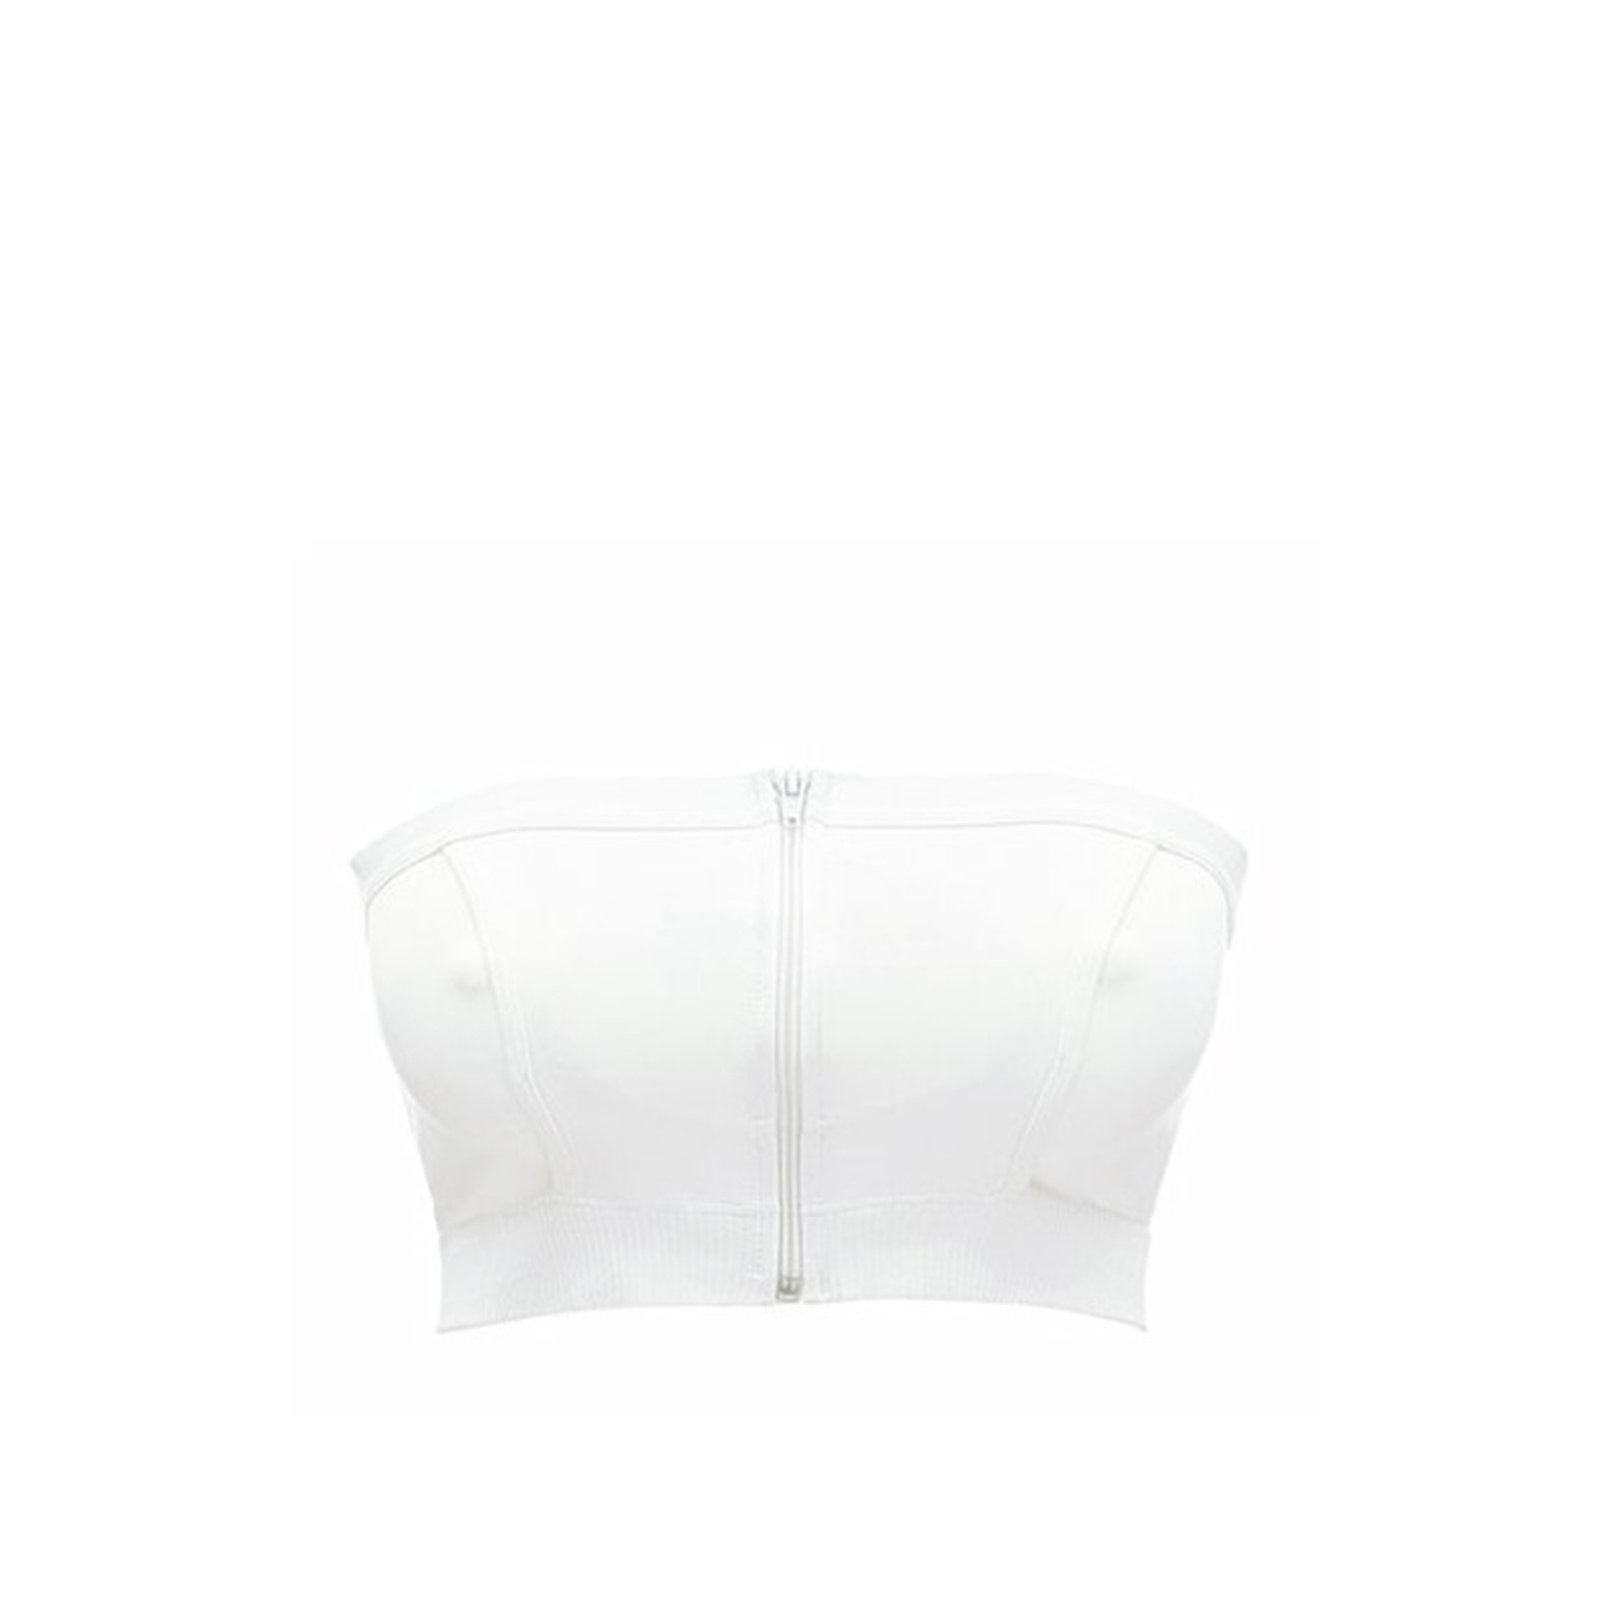 https://static.beautytocare.com/cdn-cgi/image/width=1600,height=1600,f=auto/media/catalog/product//m/e/medela-hands-free-pumping-bustier-white-small-size-x1.jpg